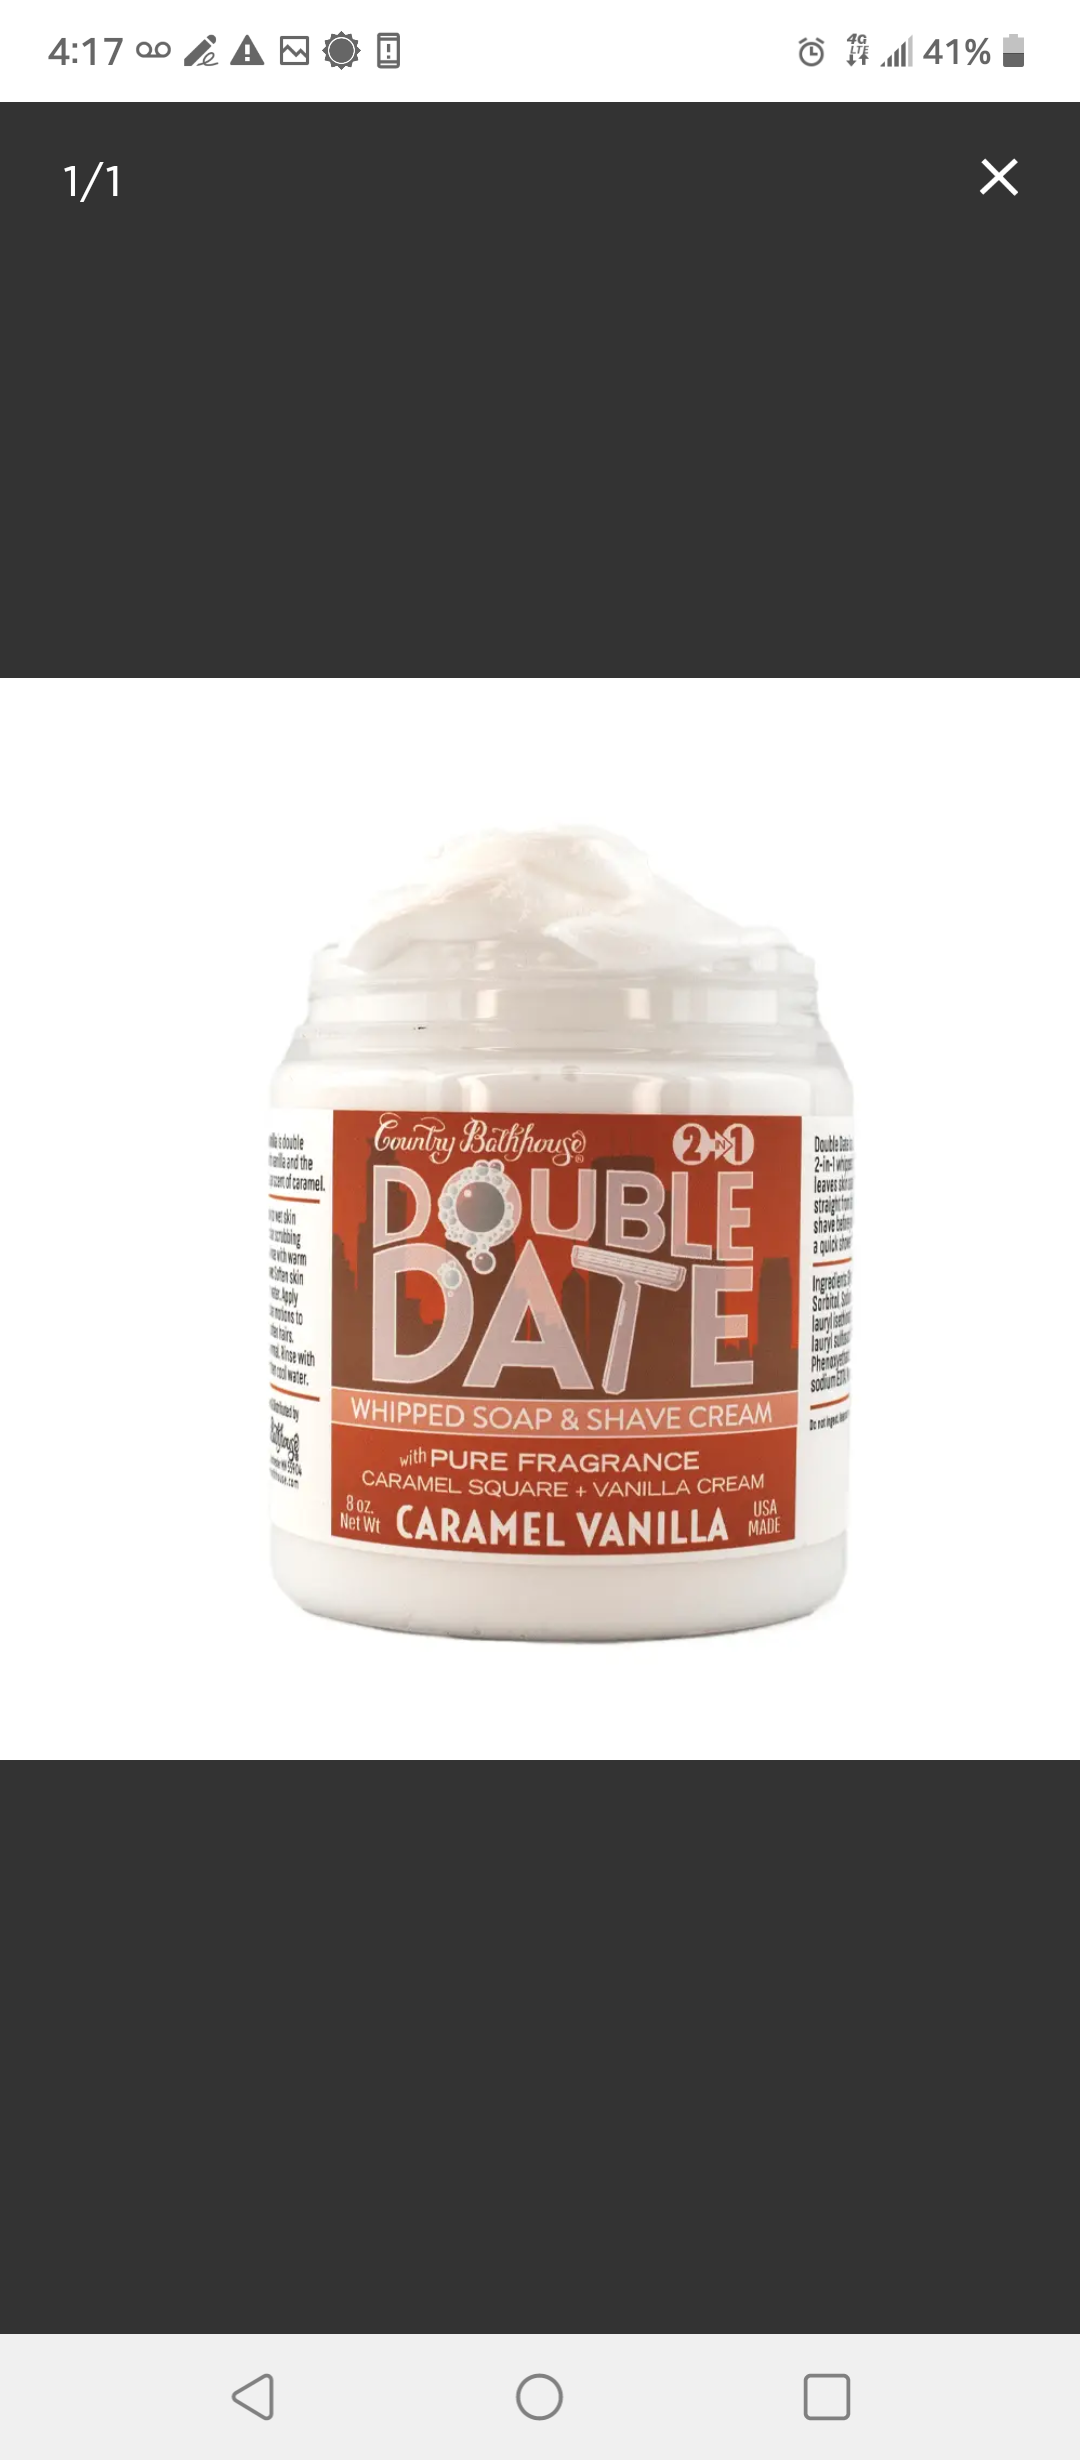 Country bath House double date whipped soap and shave cream